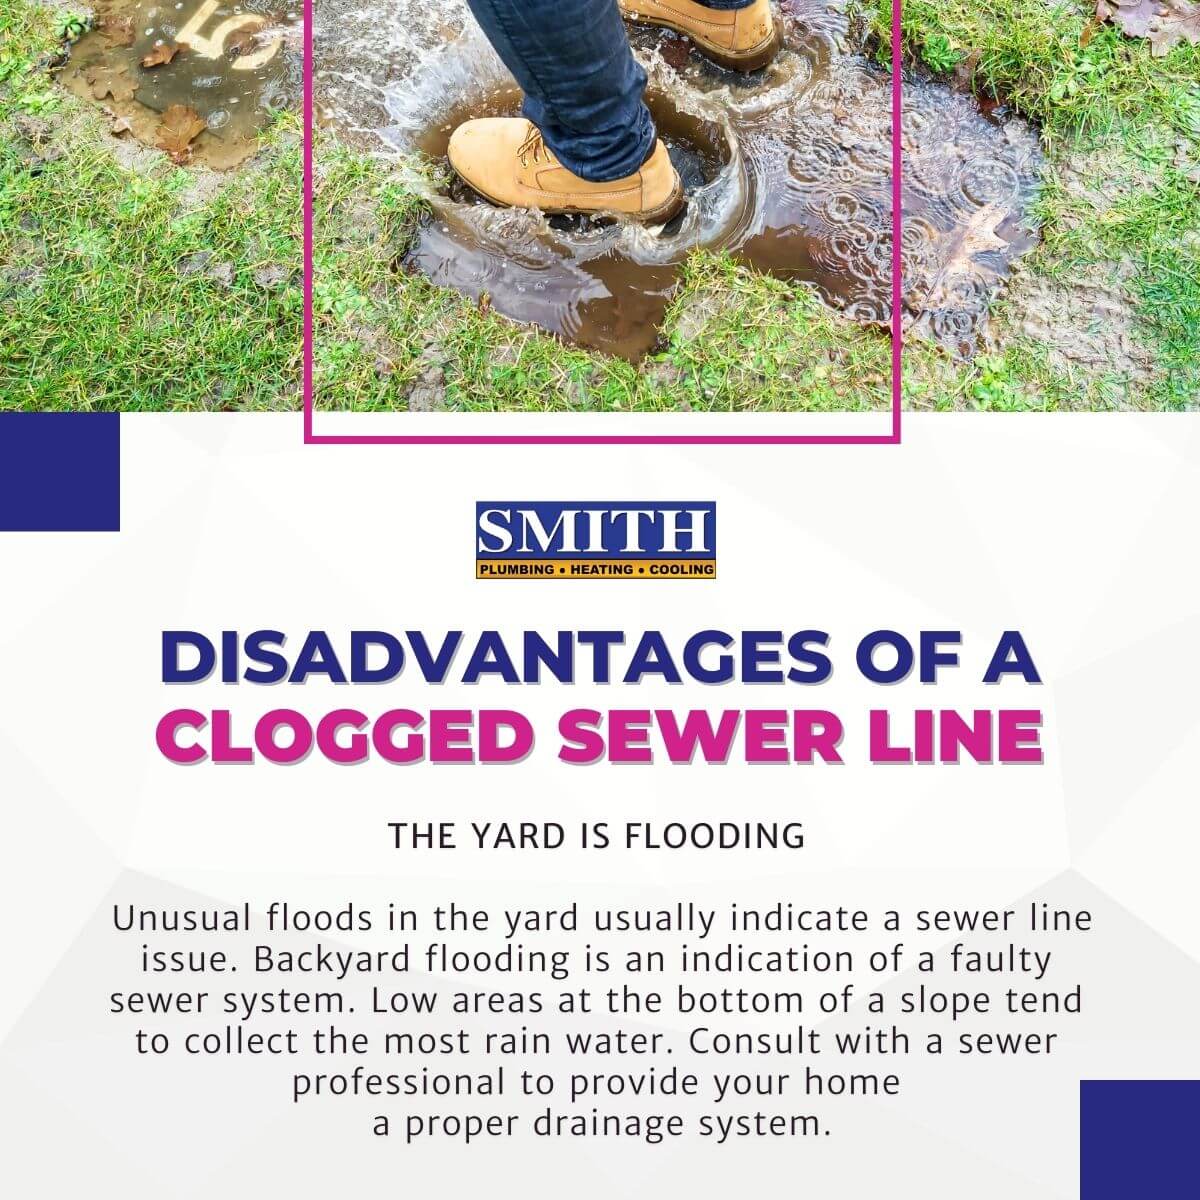 Disadvantages of a clogged sewer line page 6